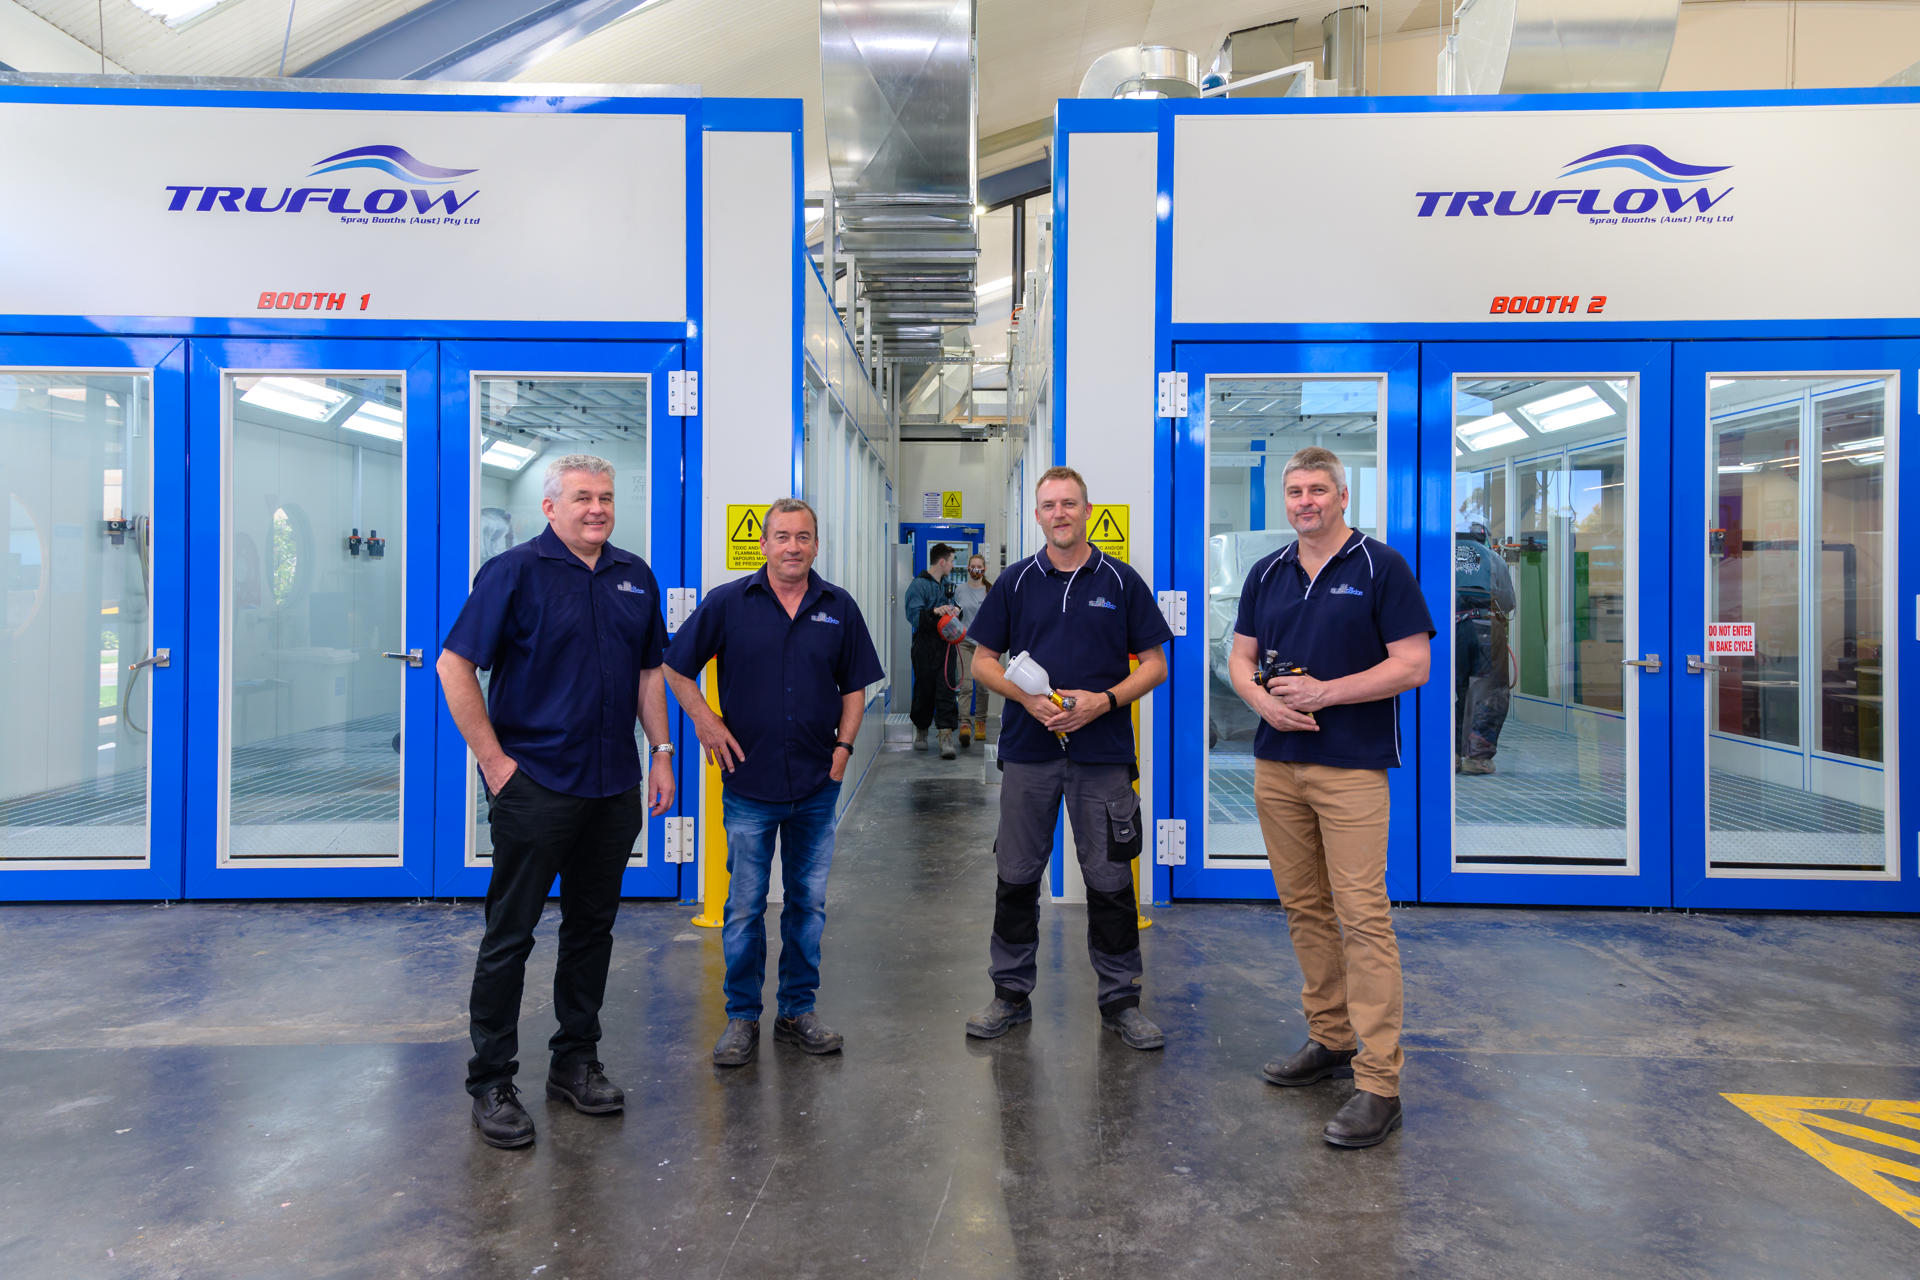 The Gordon Institute of TAFE Installs Two New Spray Booths